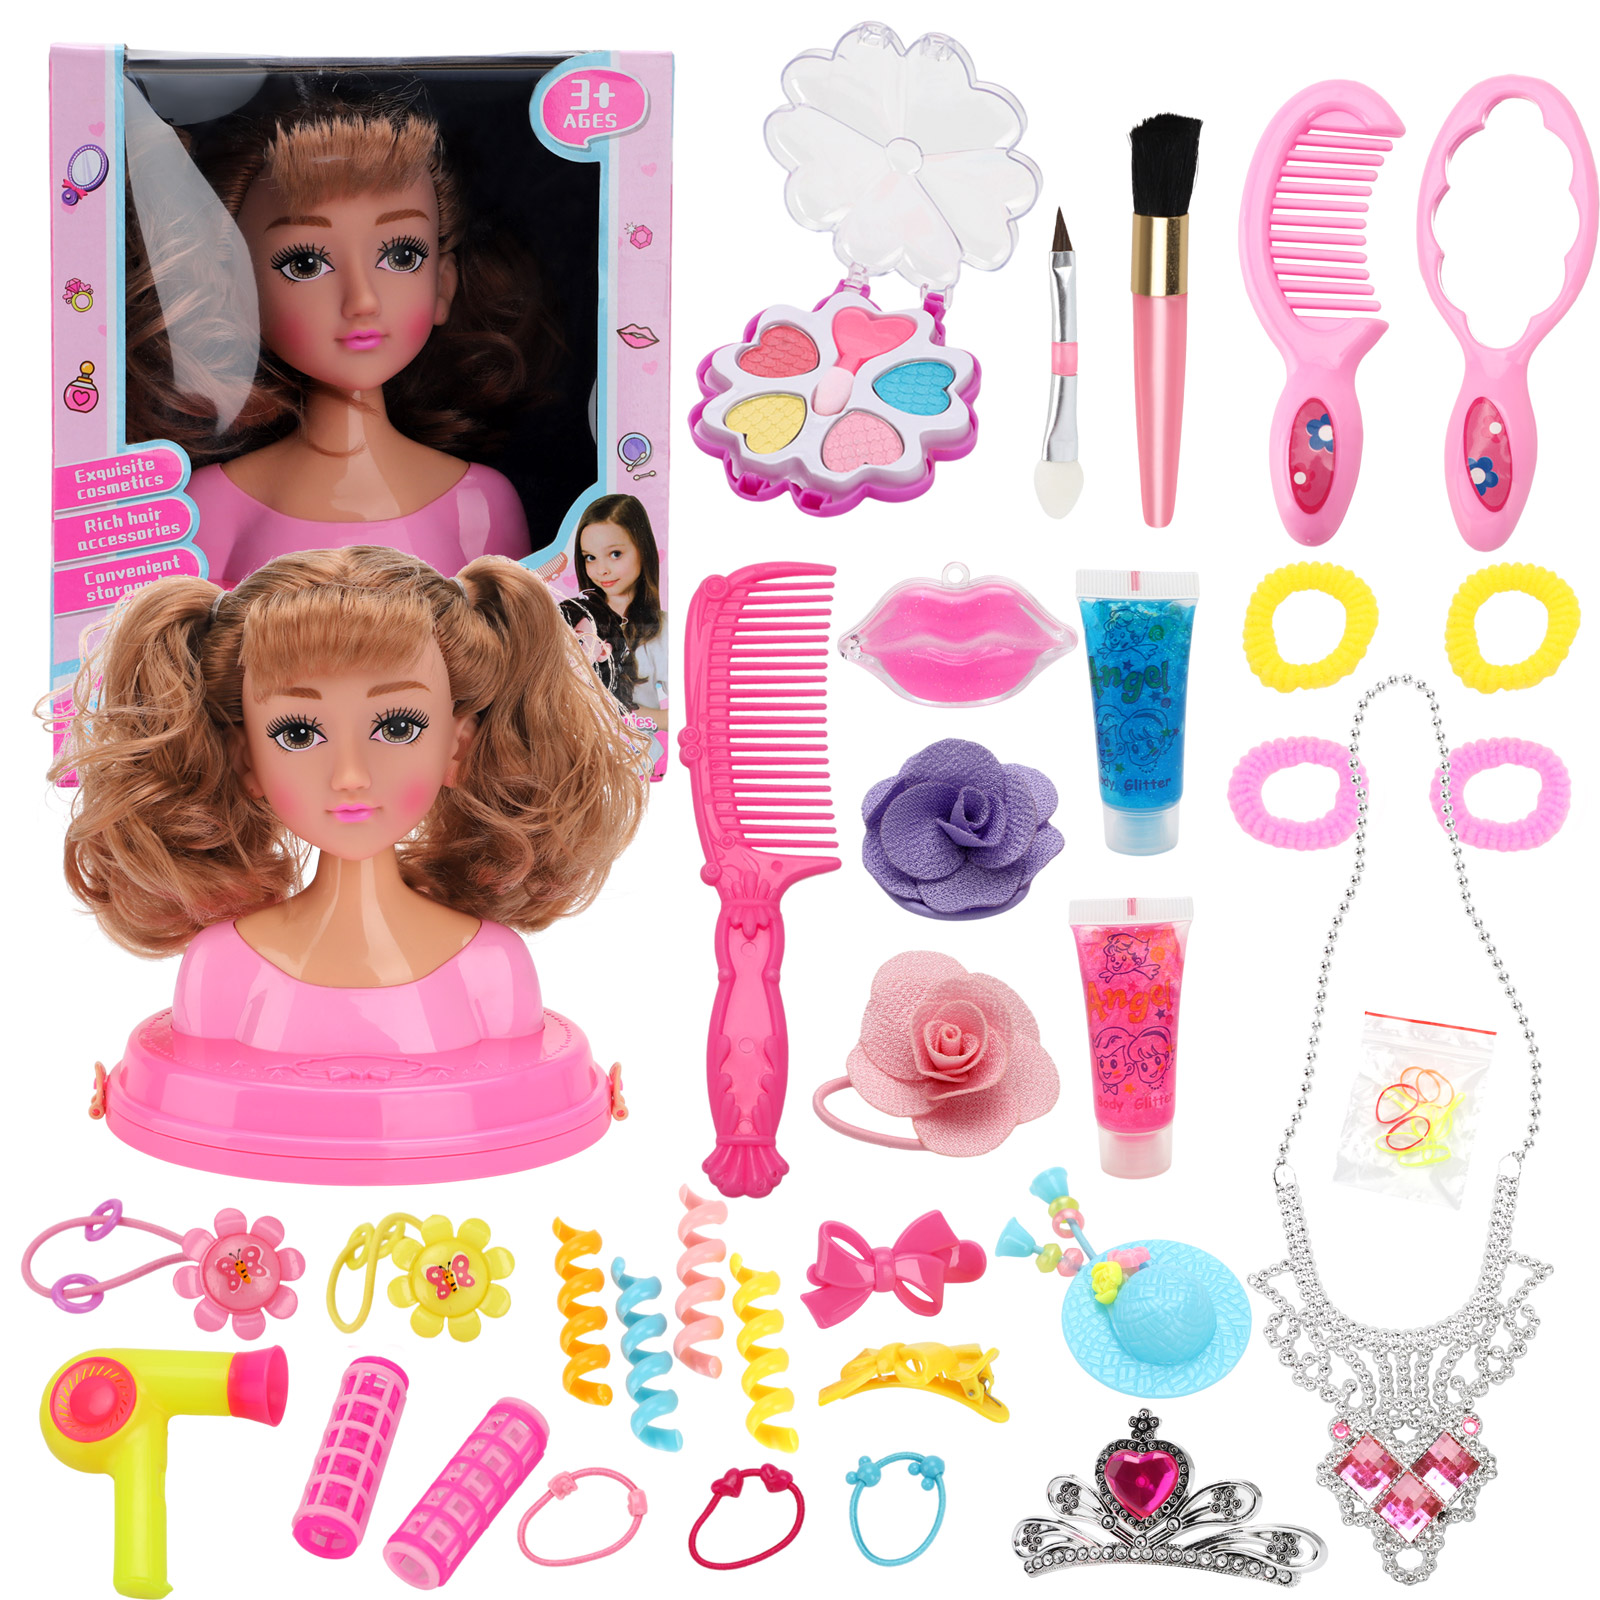 Kids Dolls Styling Head Makeup Comb Hair Toy Doll Set Pretend Play Princess Dressing Play Toys for Girls 3-6 Years, Size: Luxury, Pink